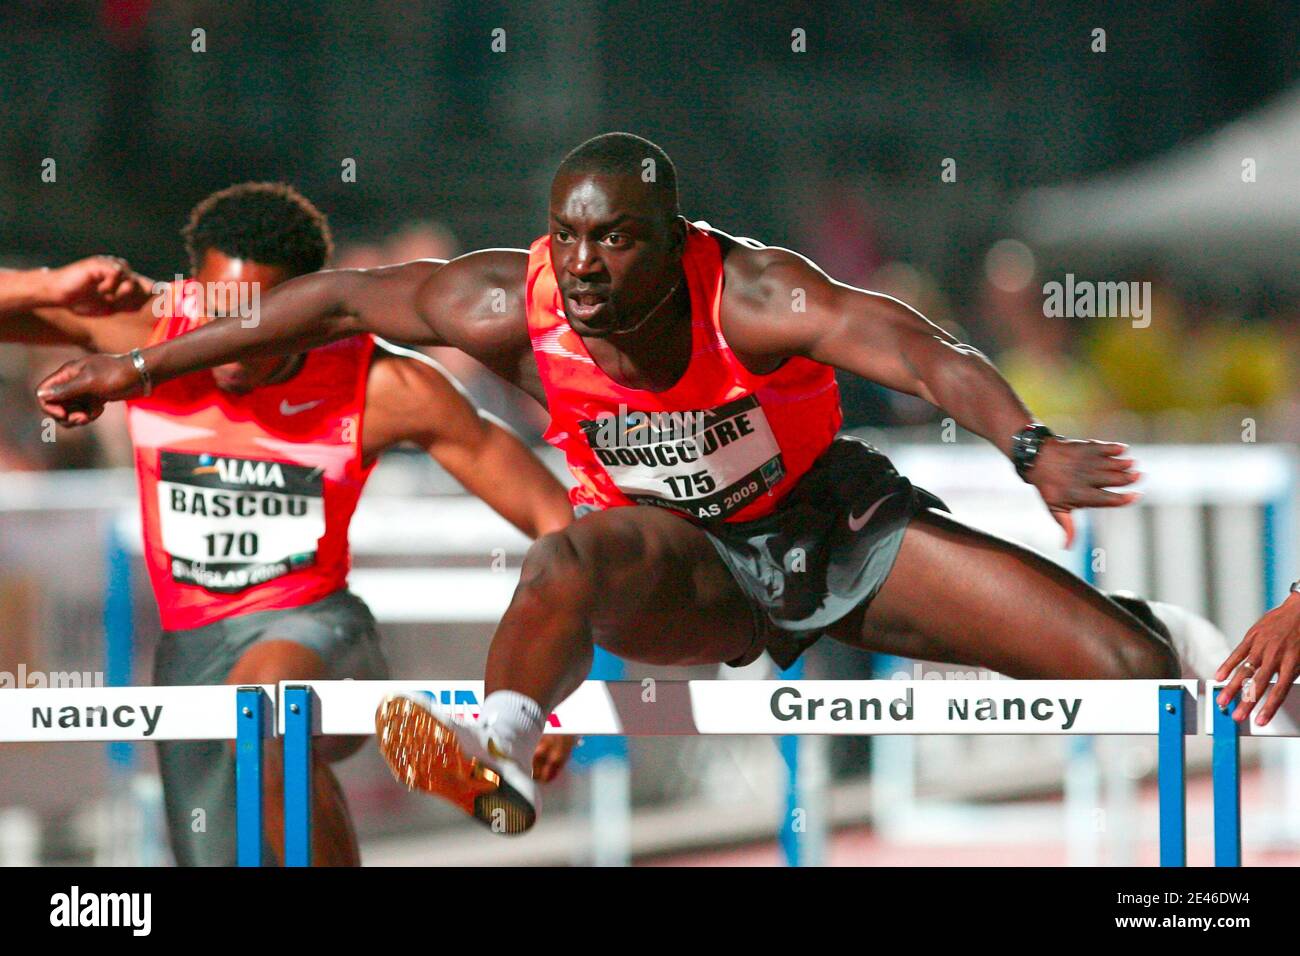 France's Ladji Doucoure competes in the 110 M Hurdles Men during the Athletics Stanislas Meeting Championships 2009 in Tromblaine, France on June 26, 2009. Photo by Cugnot Mathieu/Asa Pictures/ABACAPRESS.COM Stock Photo